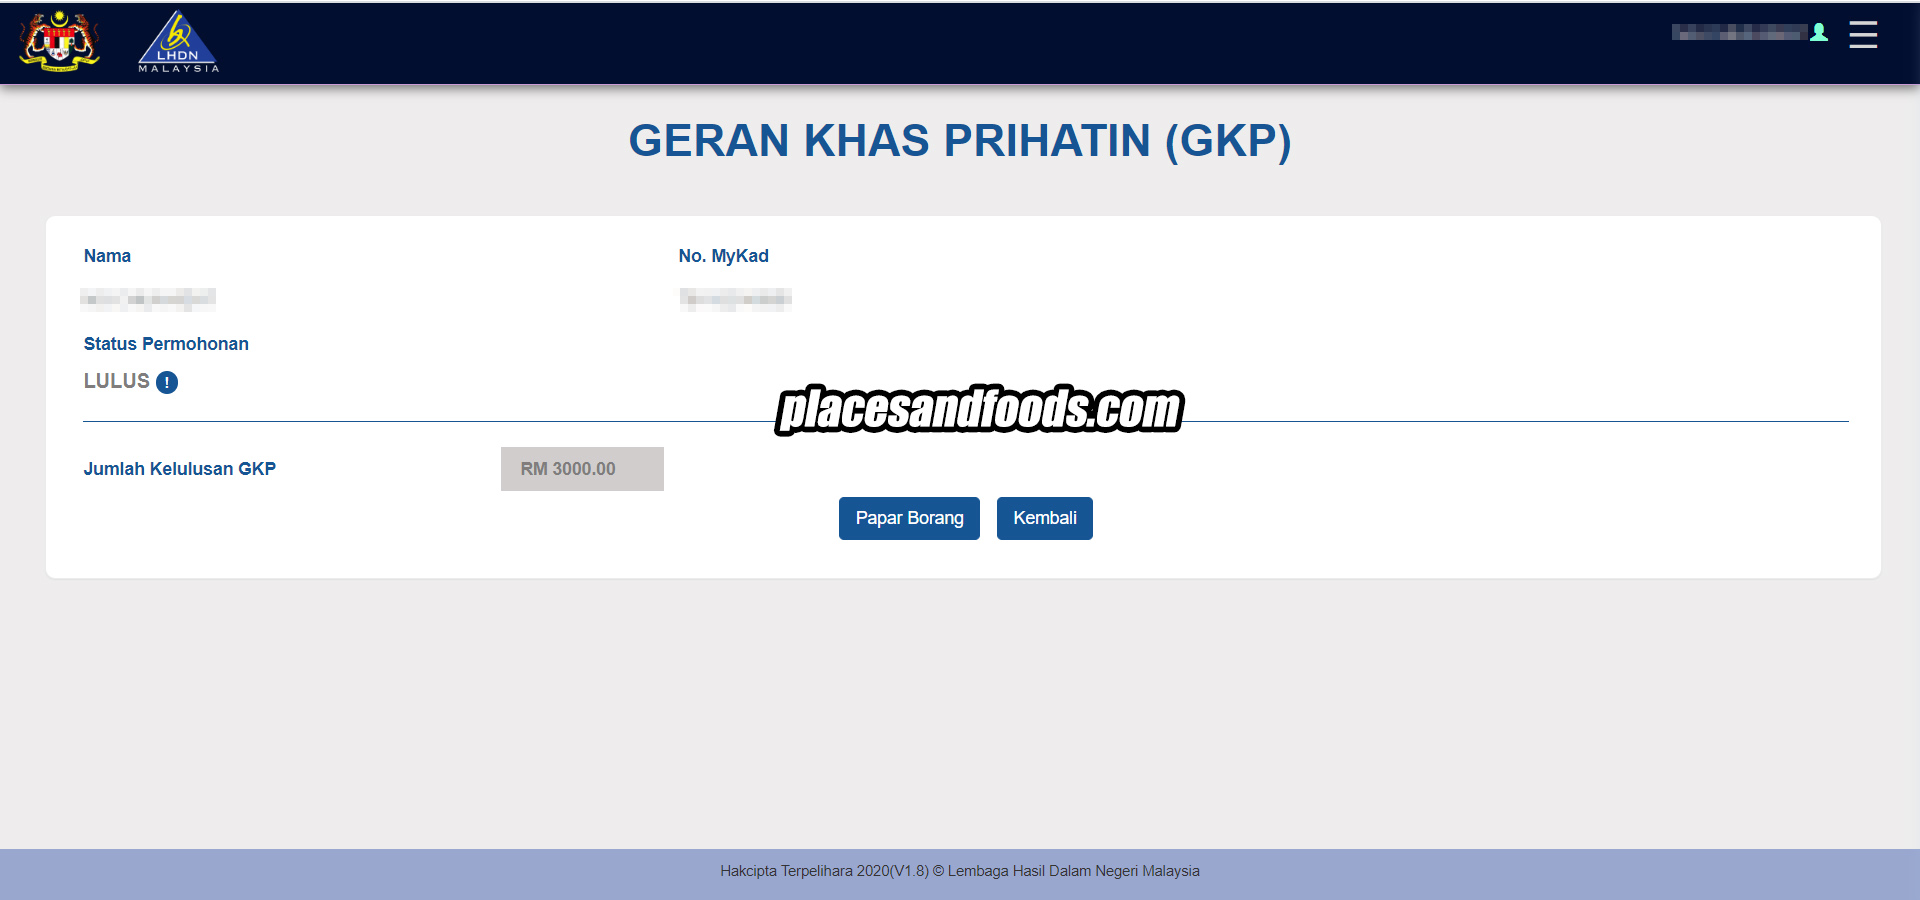 Result For Gkp Geran Khas Prihatin Is Out Today